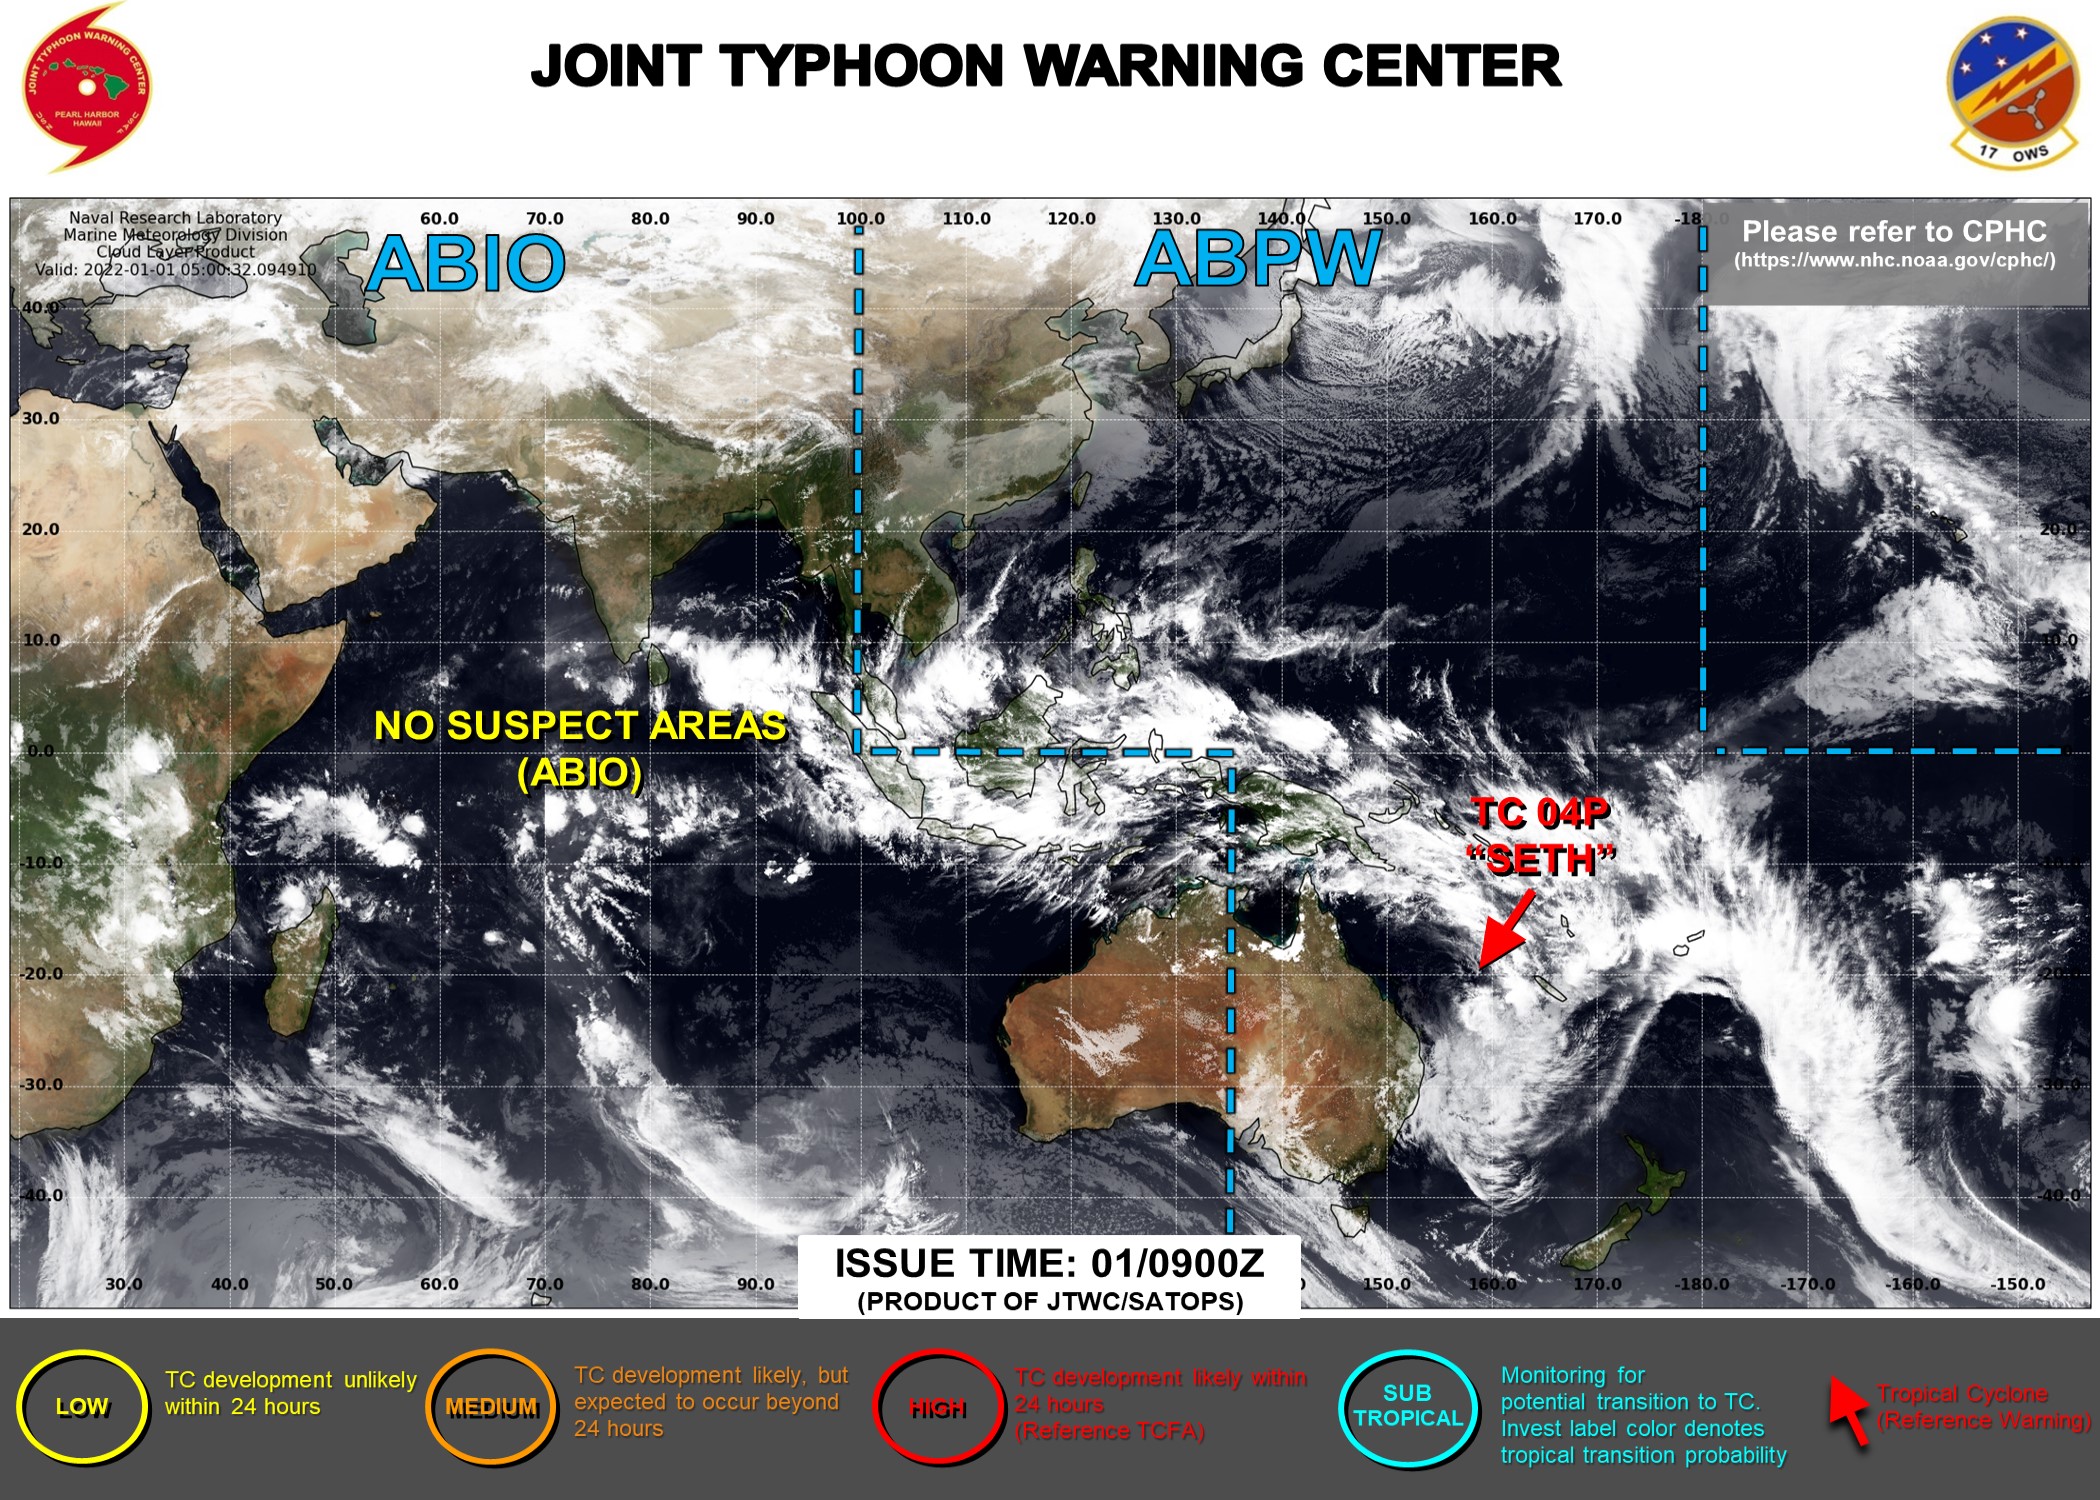 JTWC HAS JUST ISSUED WARNING 4/FINAL ON TC 04P. 3HOURLY SATELLITE BULLETINS ARE STILL ISSUED ON 04P.